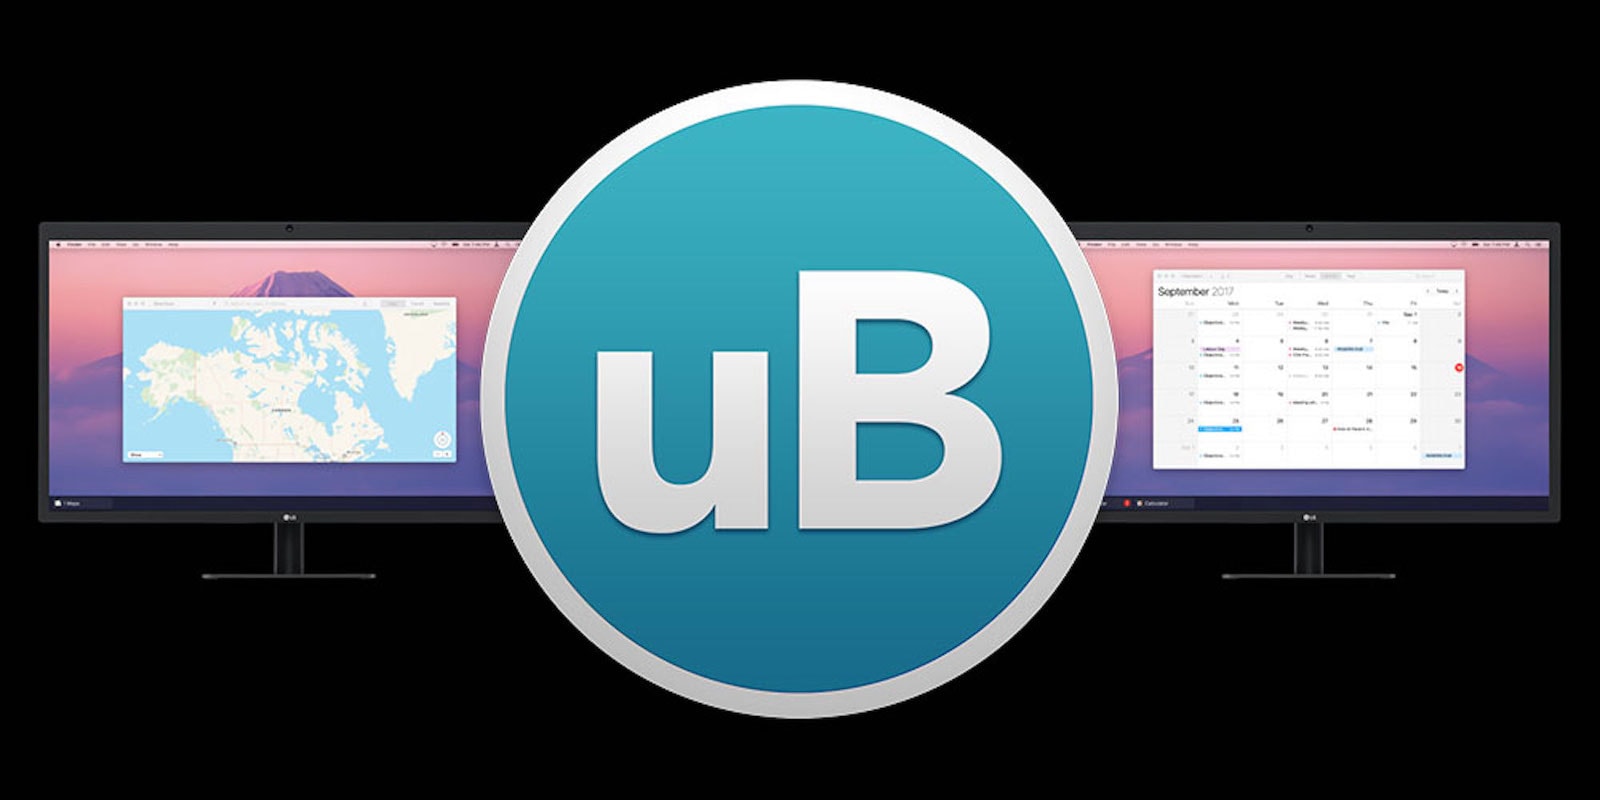 Swap our your Mac Dock with uBar 4, a Mac Dock alternative used by engineers at Facebook, Google and elsewhere.